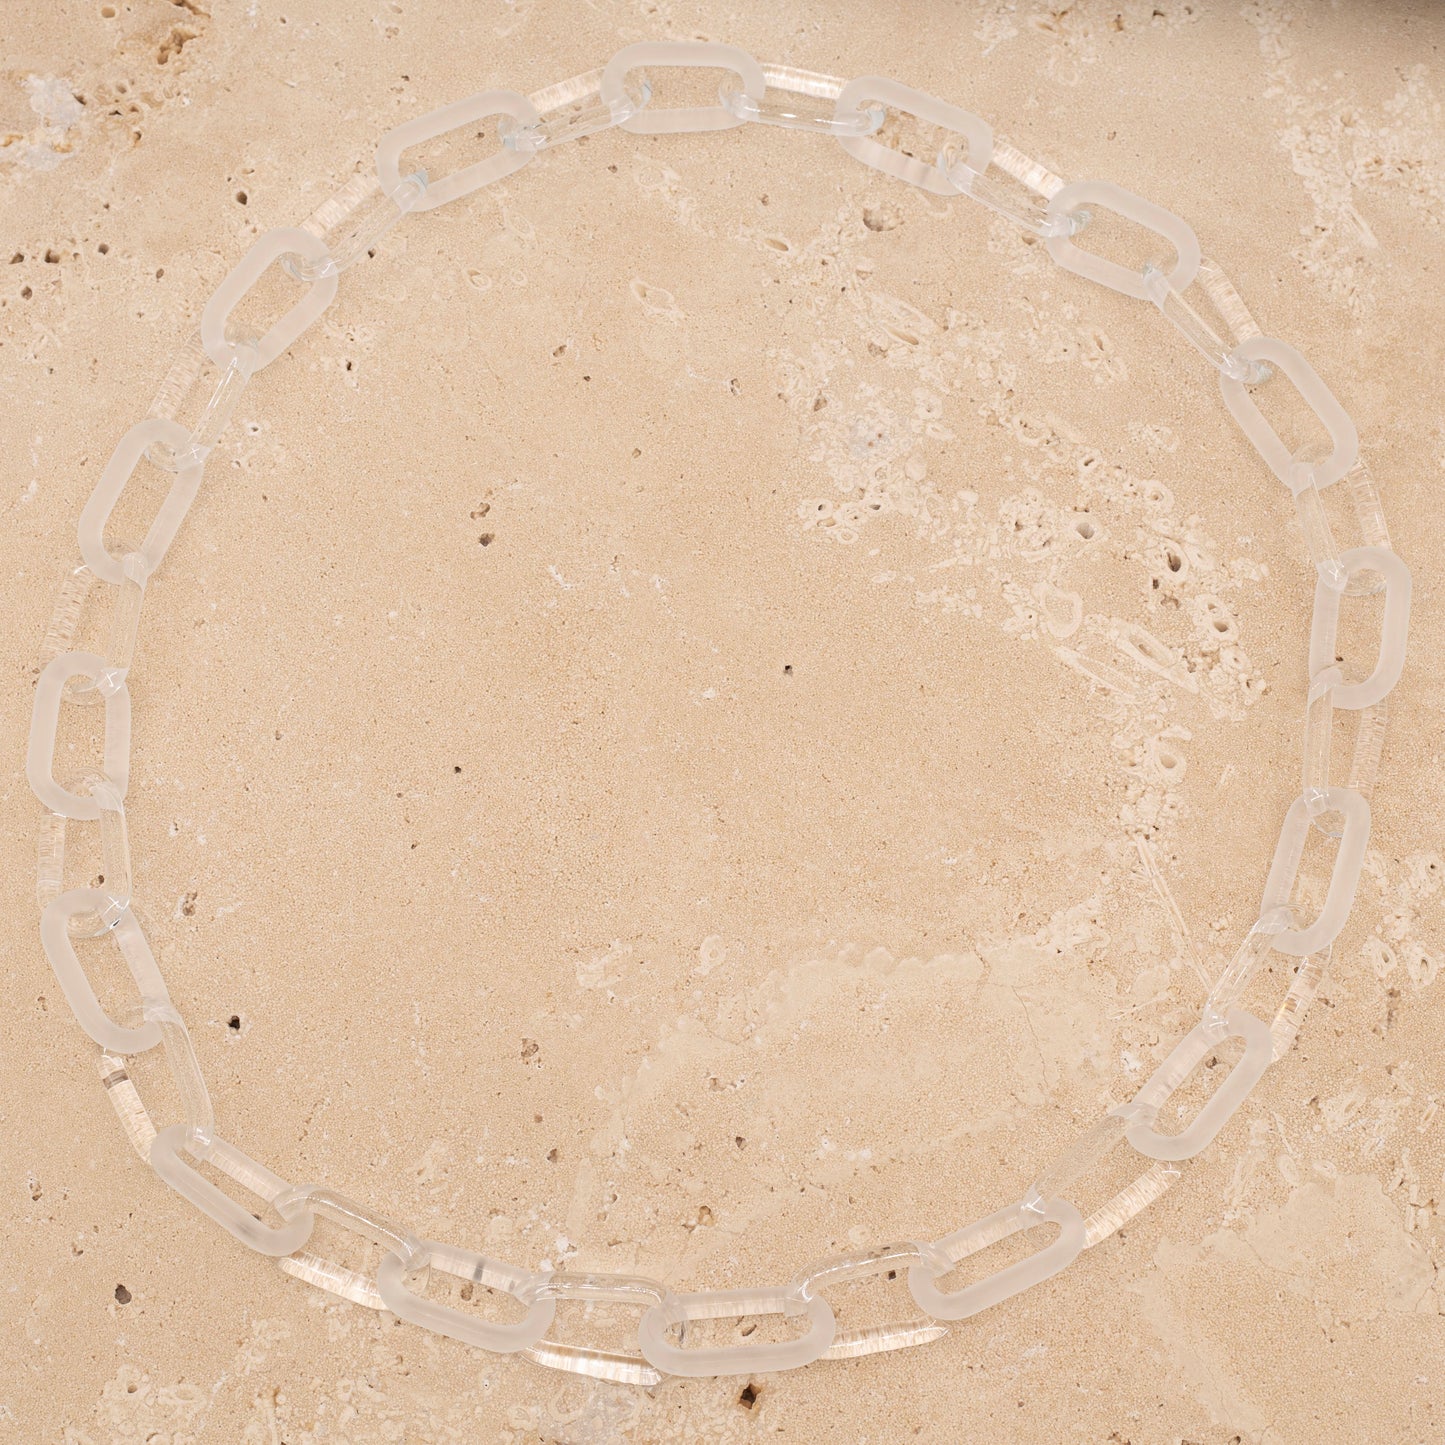 Overhead view of glass necklace made with bold links of alternating clear and frosted glass